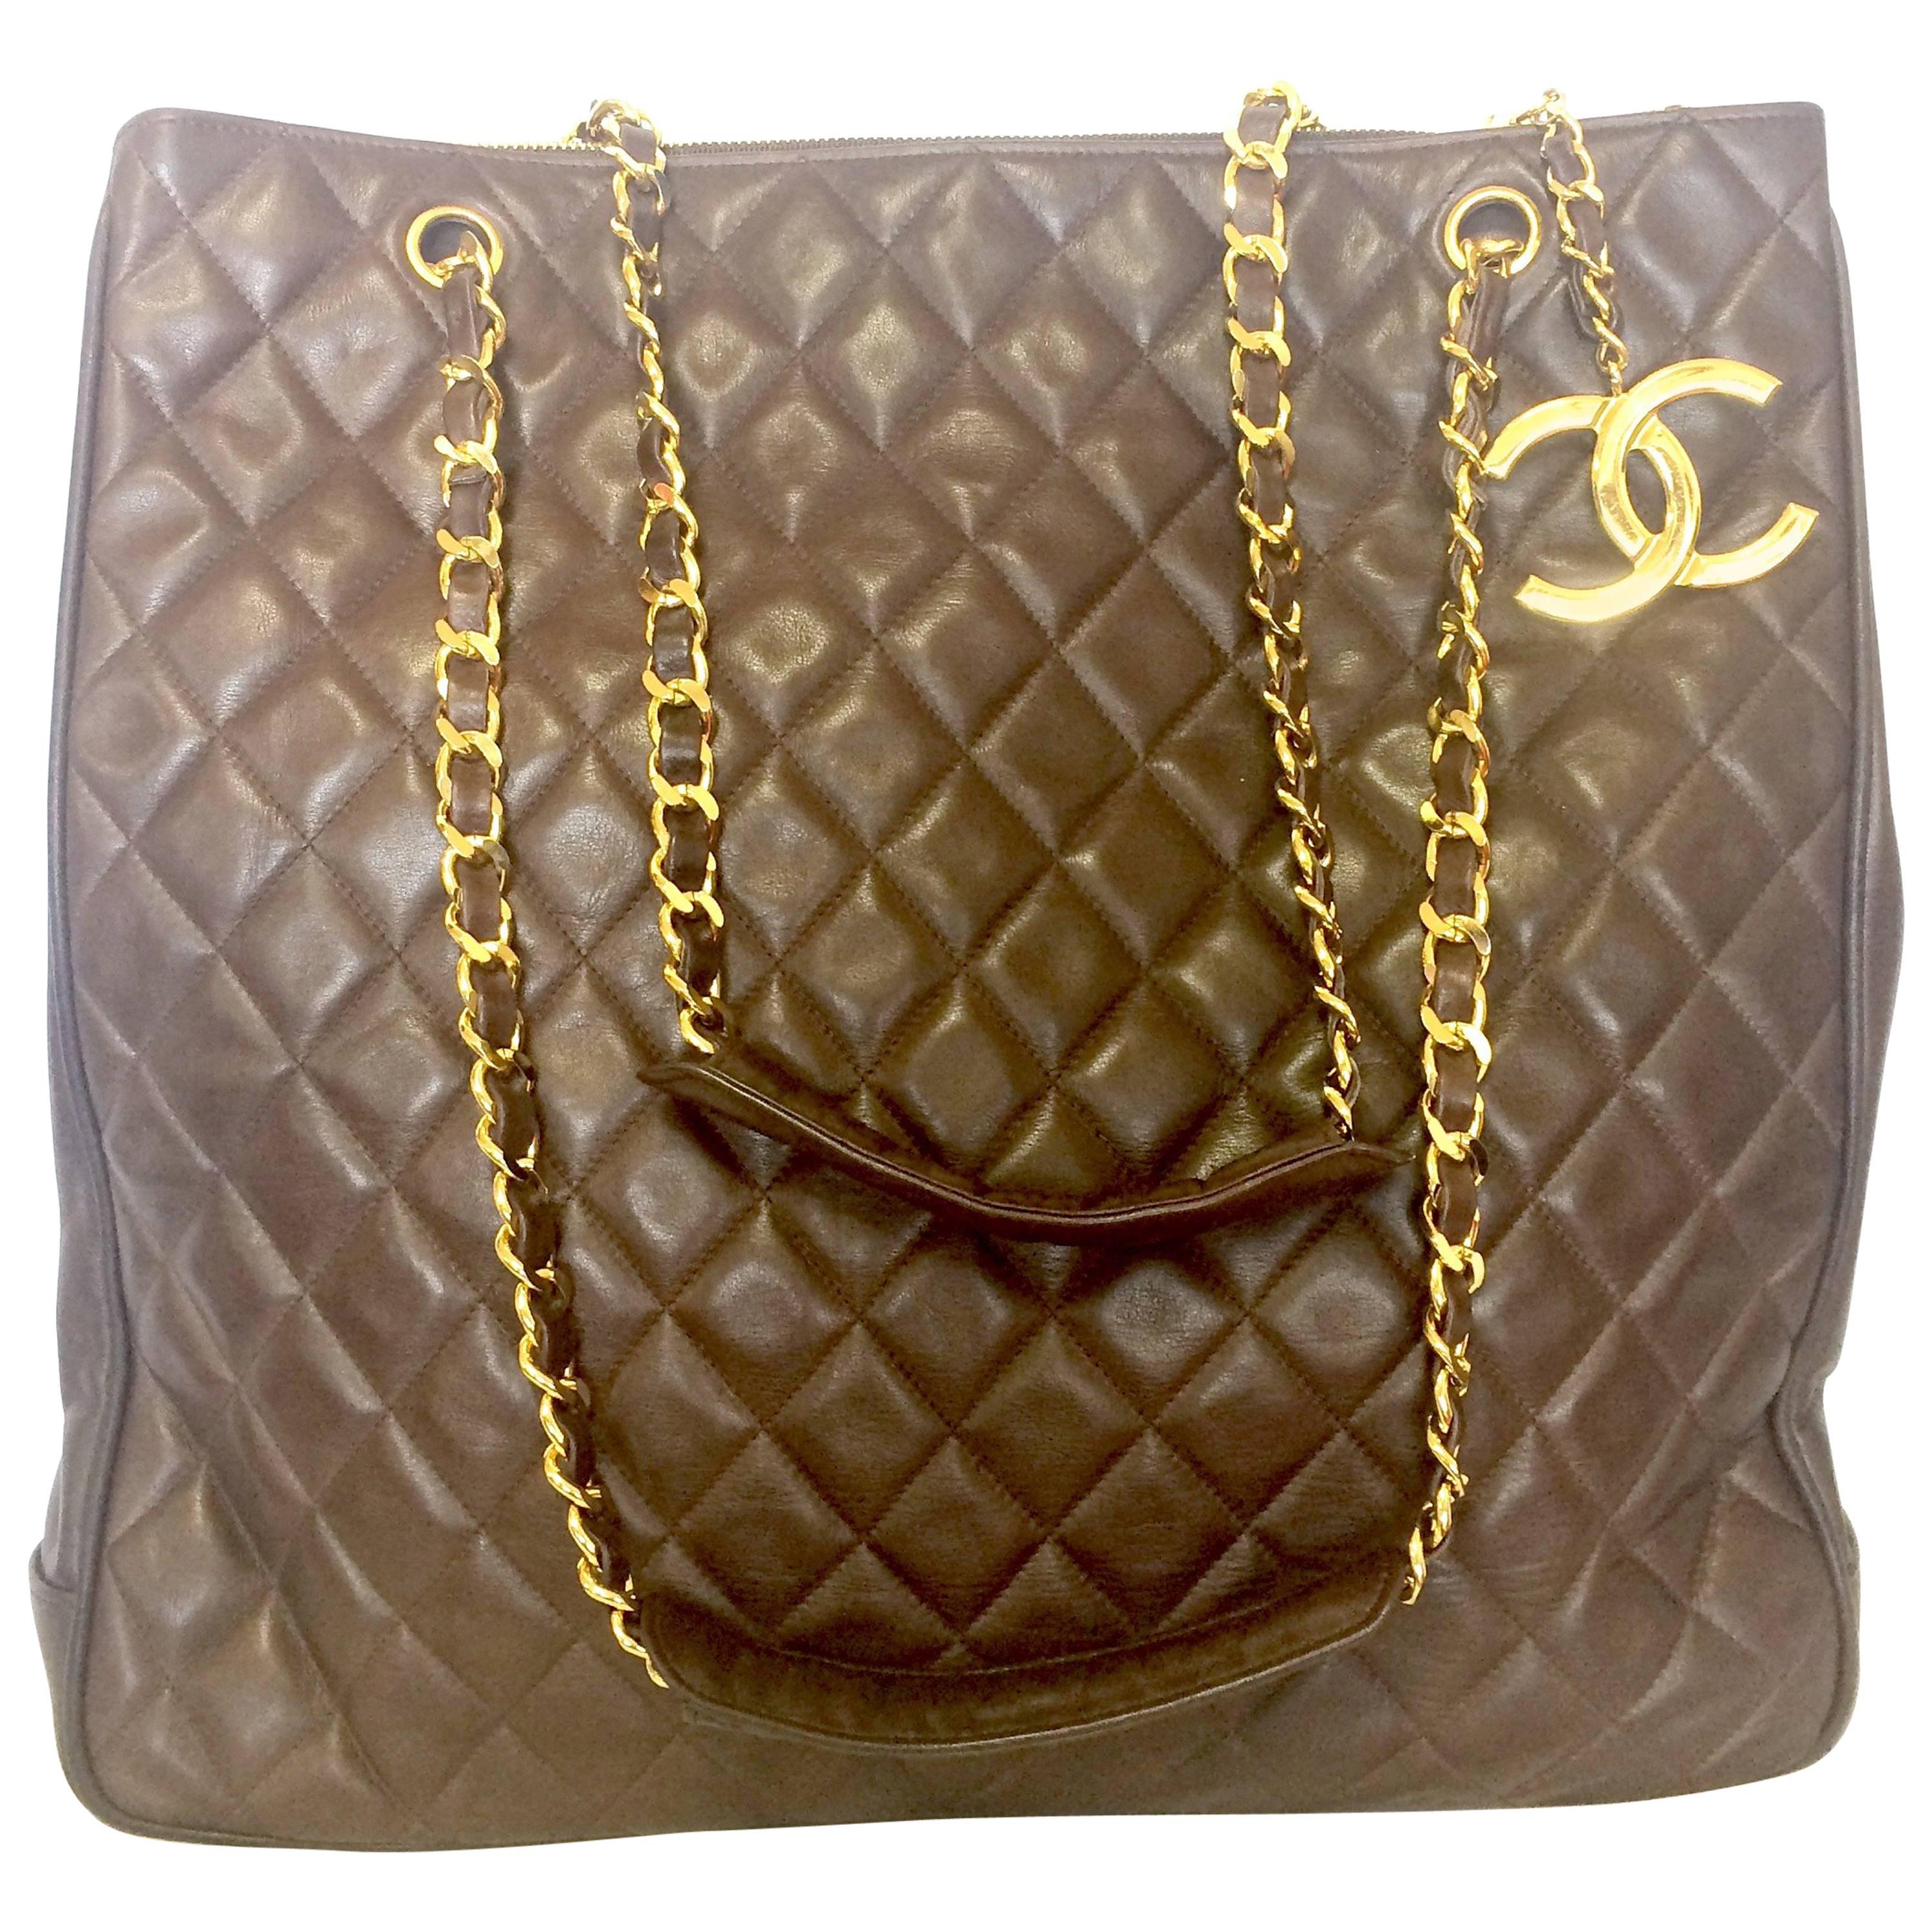 Vintage CHANEL brown lambskin large tote bag with gold tone chains and CC charm. For Sale